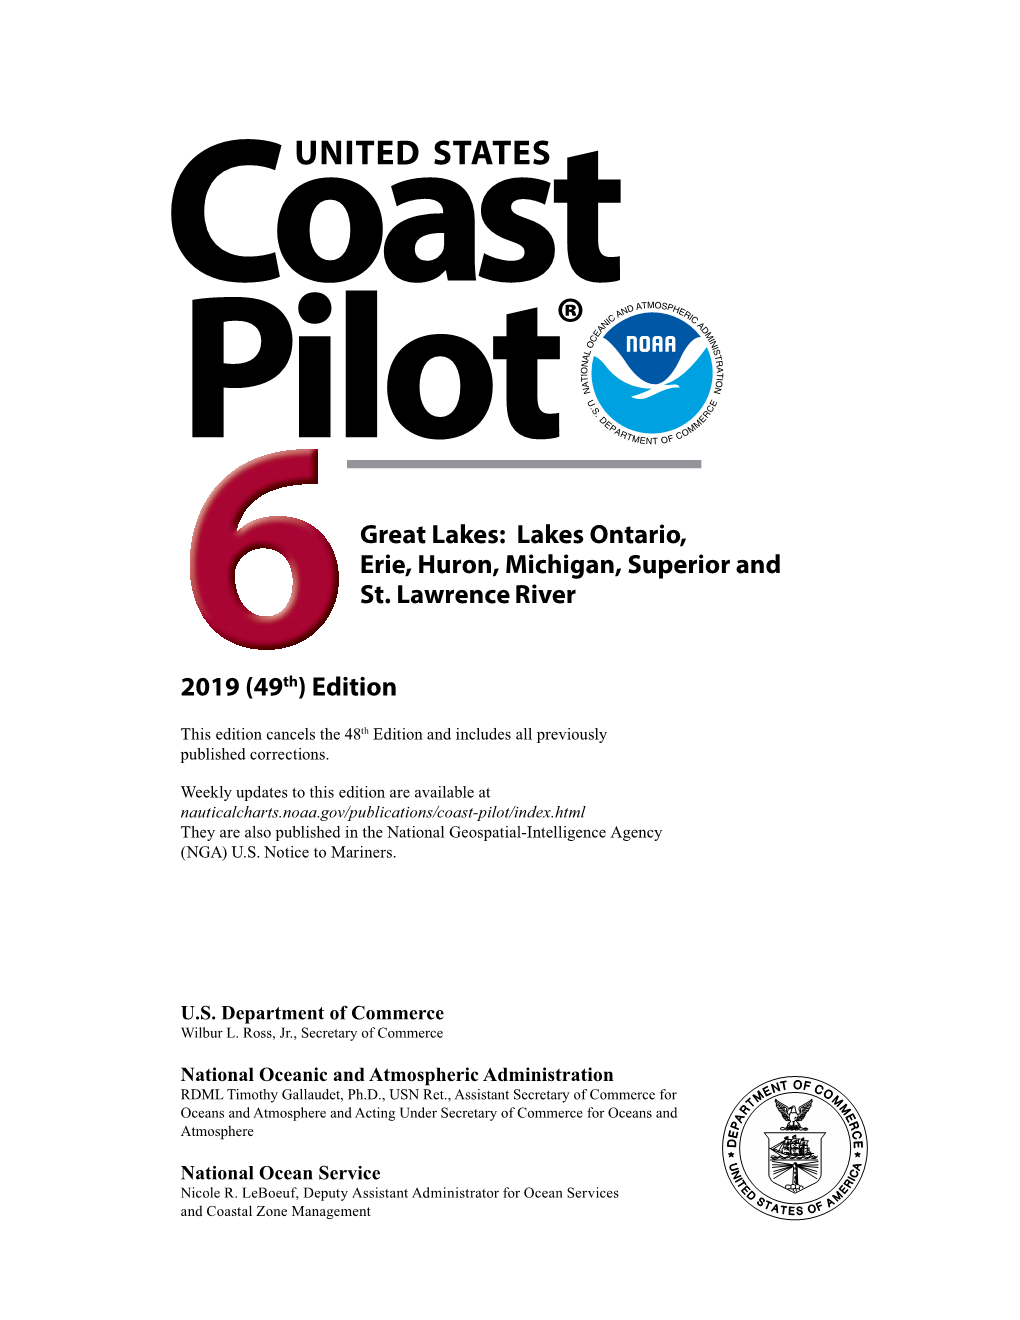 The 2019 Coast Pilot 6 Book for the Great Lakes Is Now Available in PDF Form